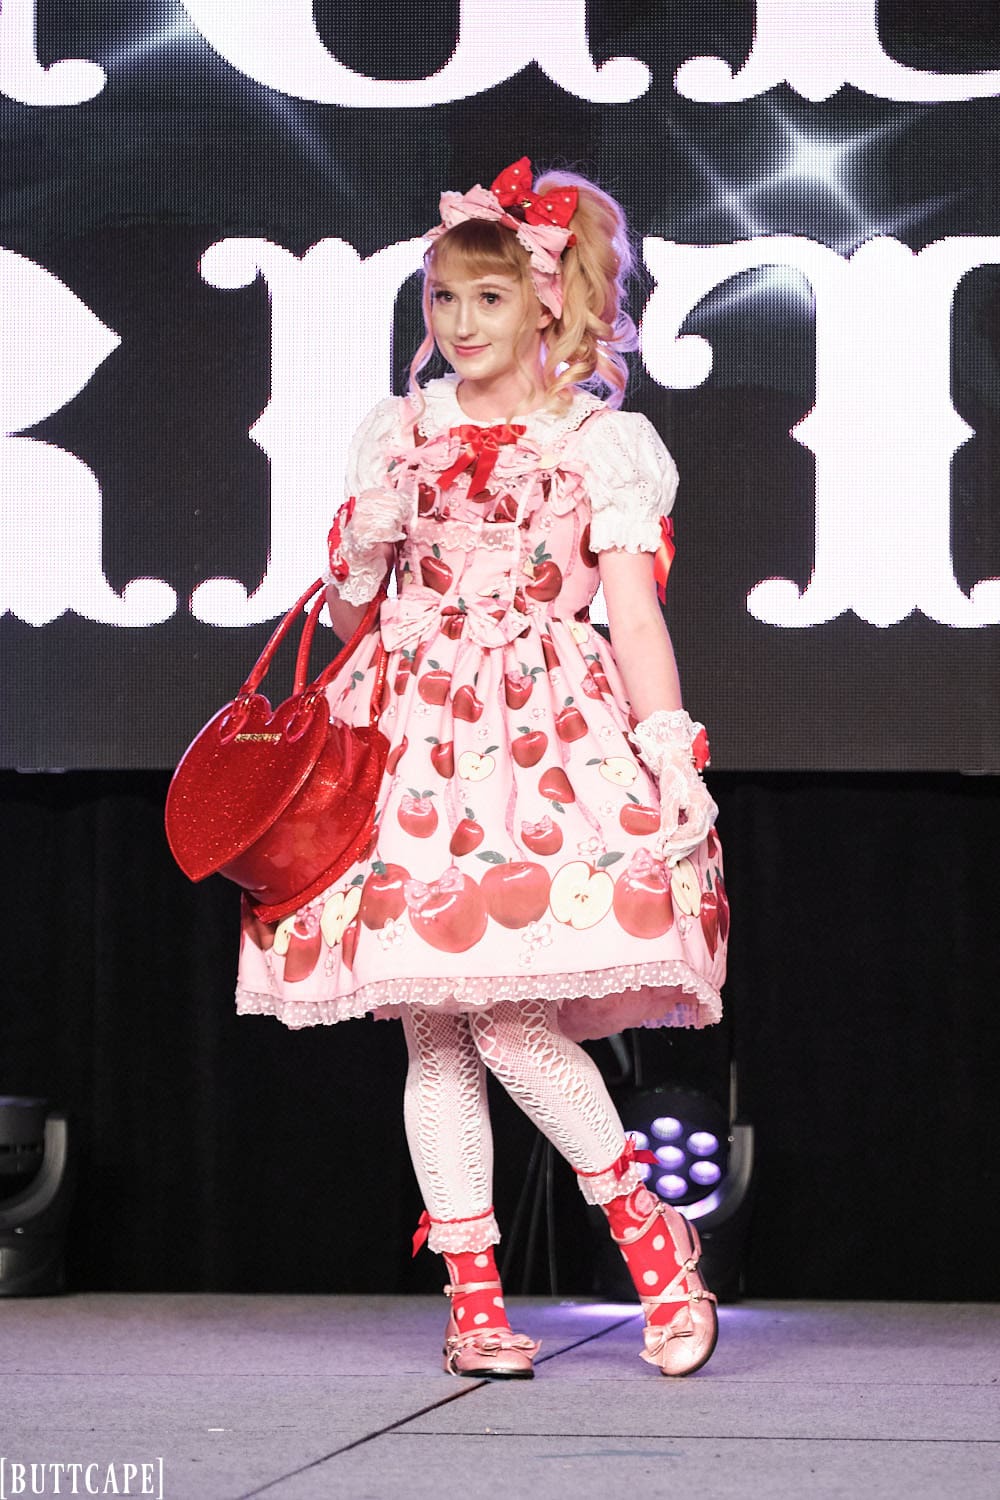 Model 3 wearing pink and red cherry themed lolita outfit - full body 1.